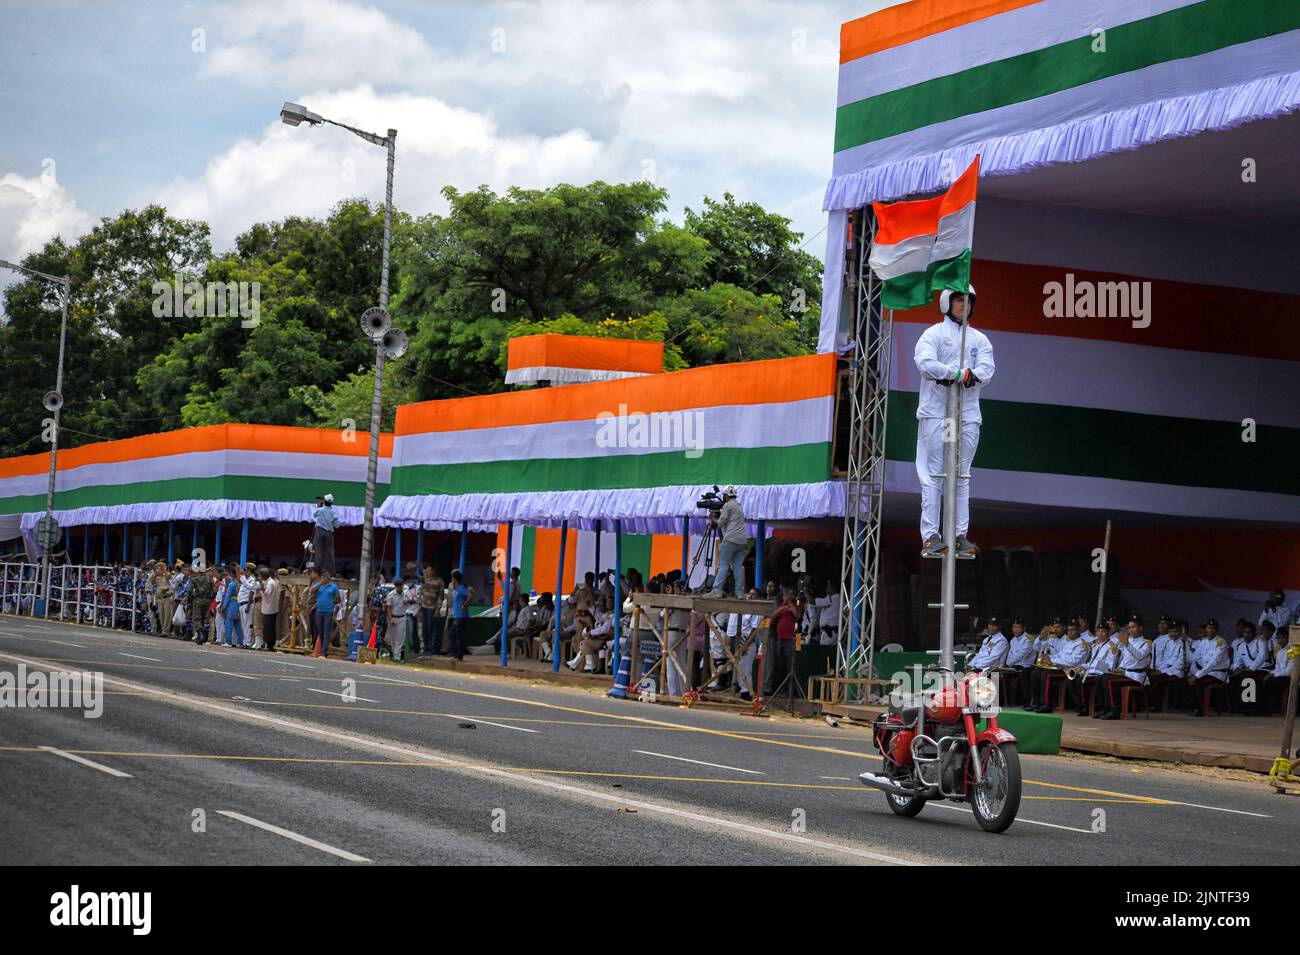 Kolkata Police officer seen practicing different stunts on bikes during the Independence day Final Dress Rehearsal. India prepares to celebrate the 75th Independence day on 15th August 2022 as part of the Azadi Ka Amrit Mahotsav celebration. Stock Photo